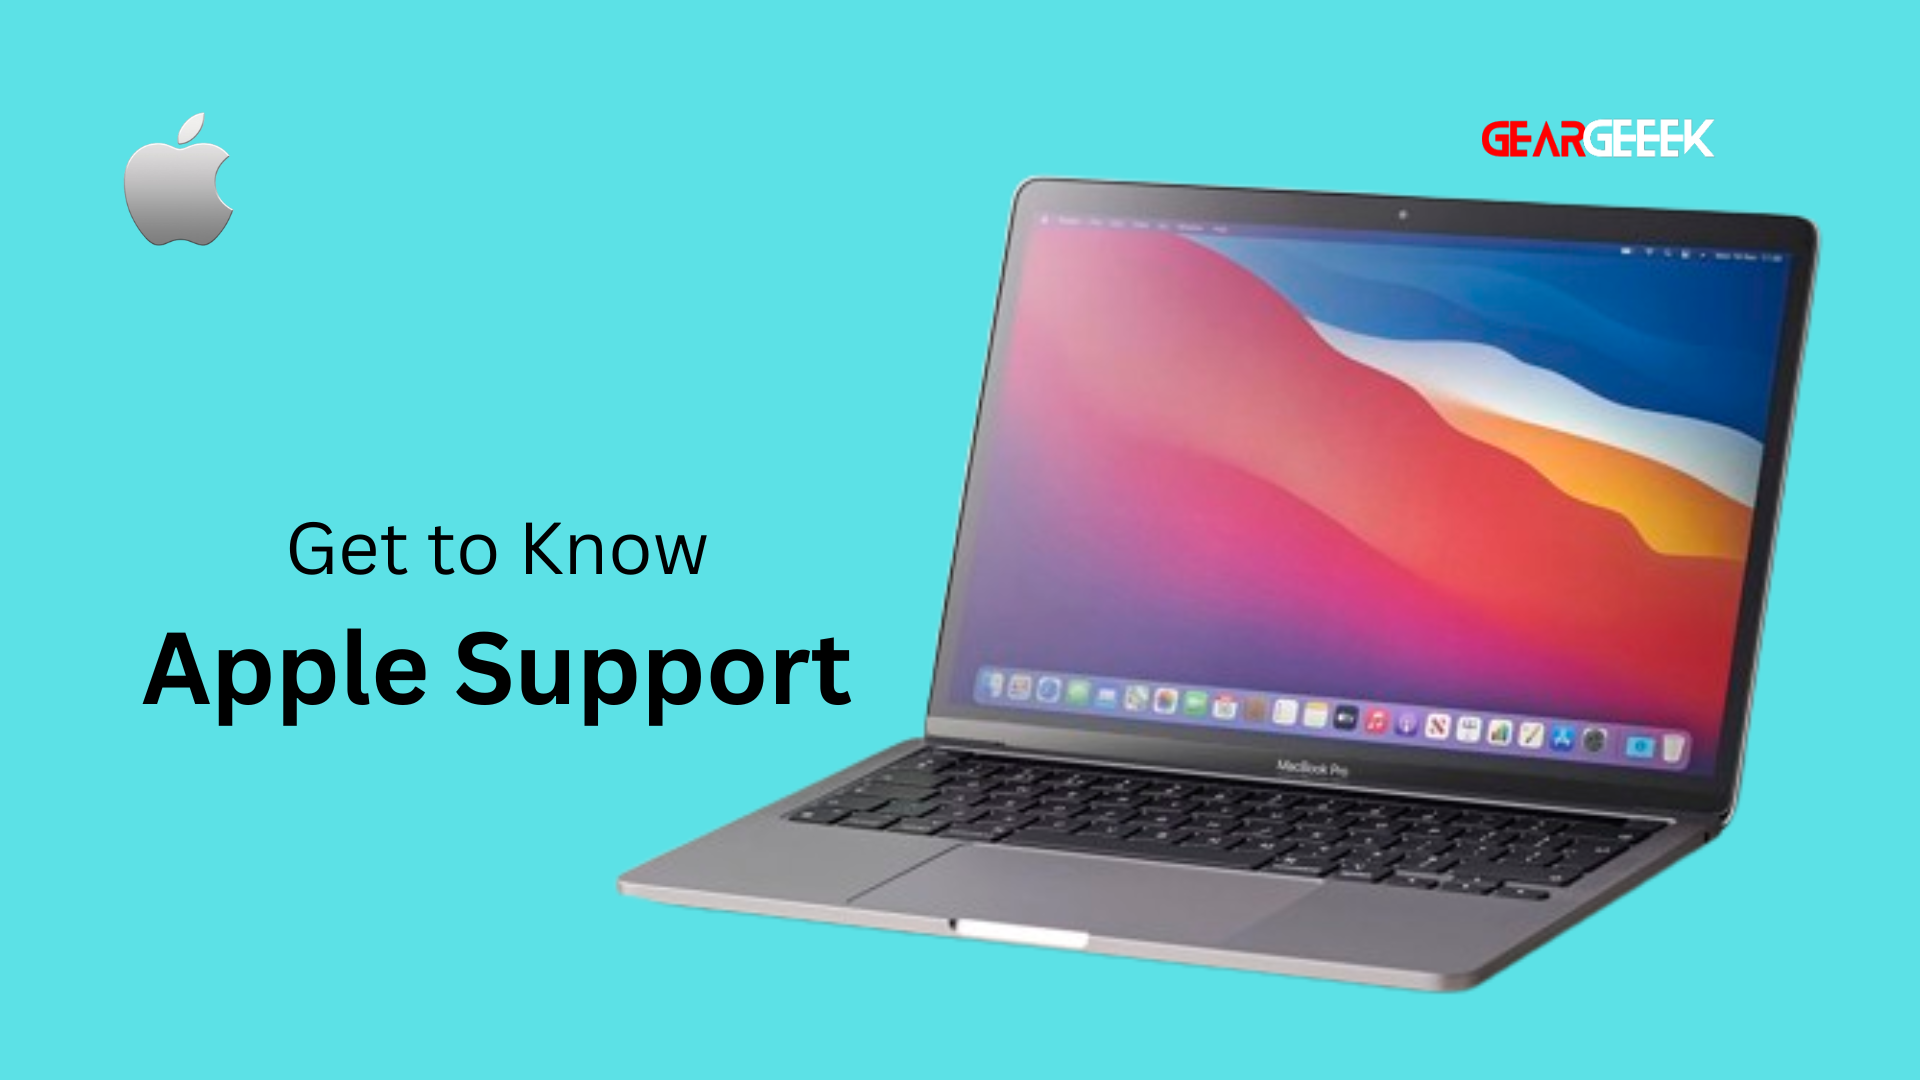 How to Unlock MacBook Pro Without Password or Apple ID